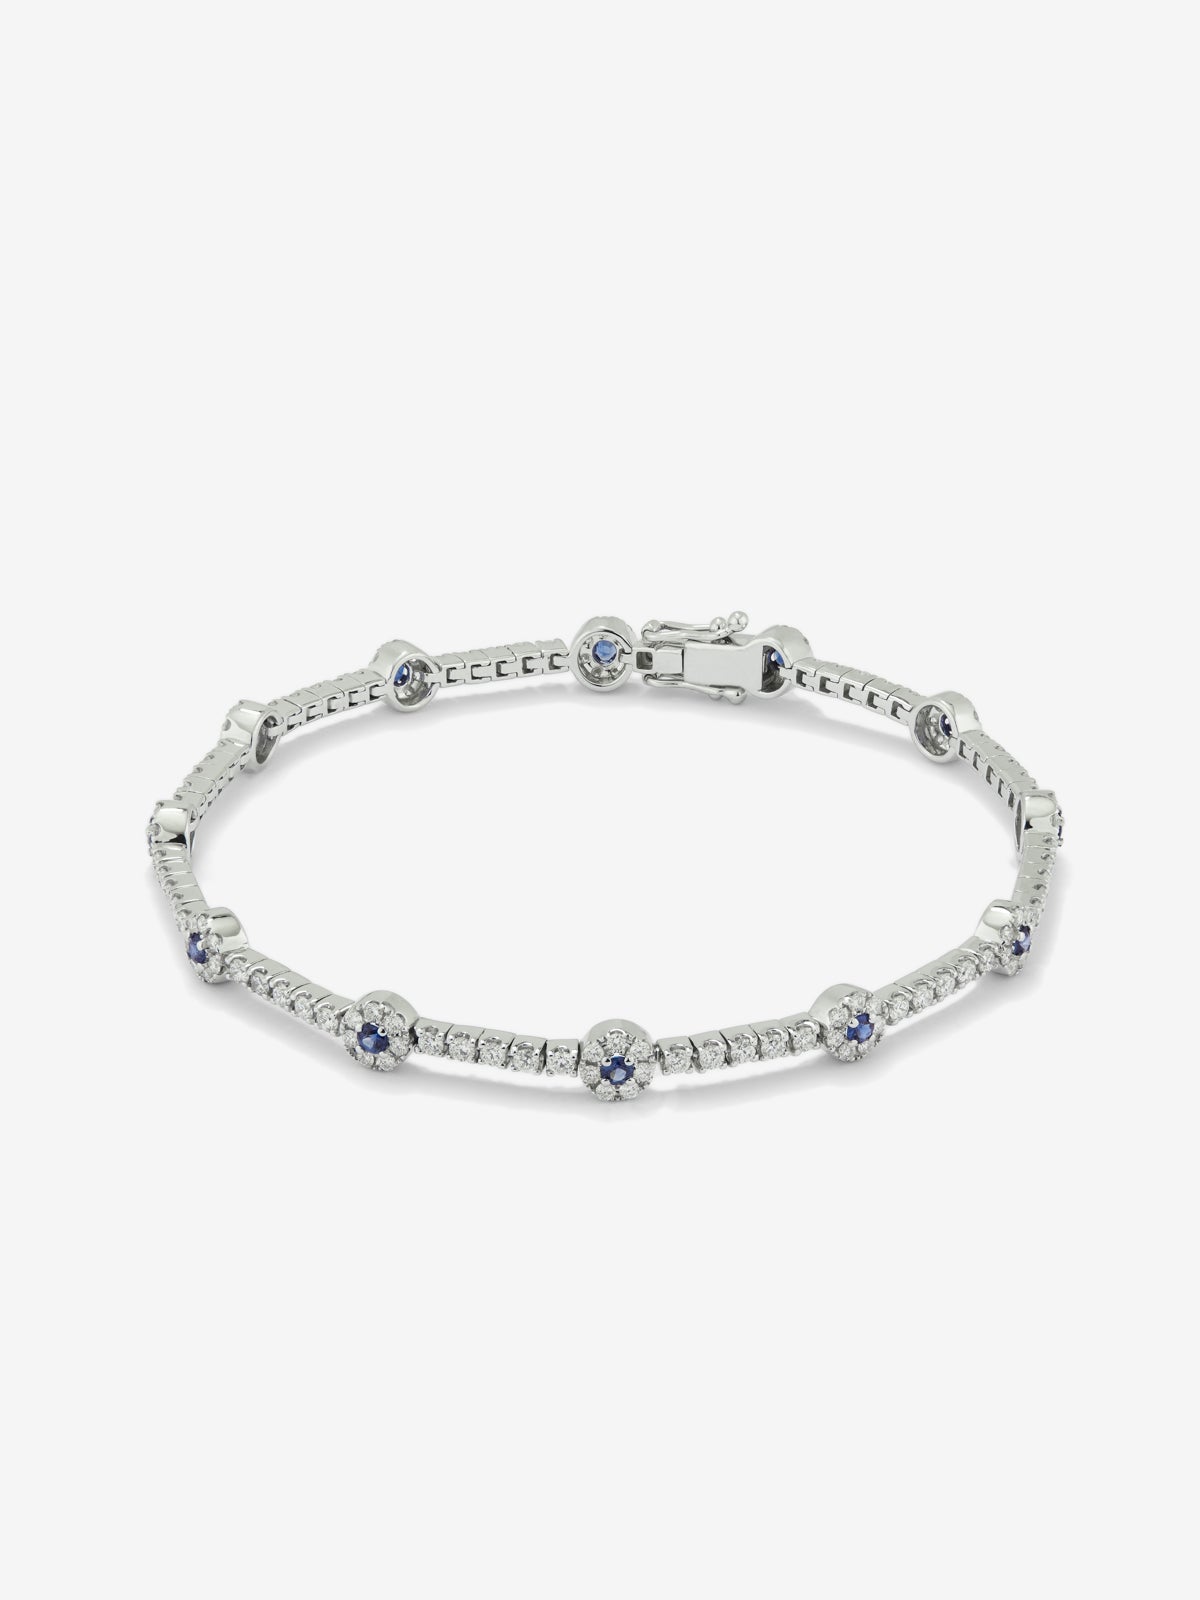 18K white gold bracelet with 143 brilliant-cut diamonds with a total of 1.66 cts and 12 brilliant-cut blue sapphires with a total of 0.5 cts